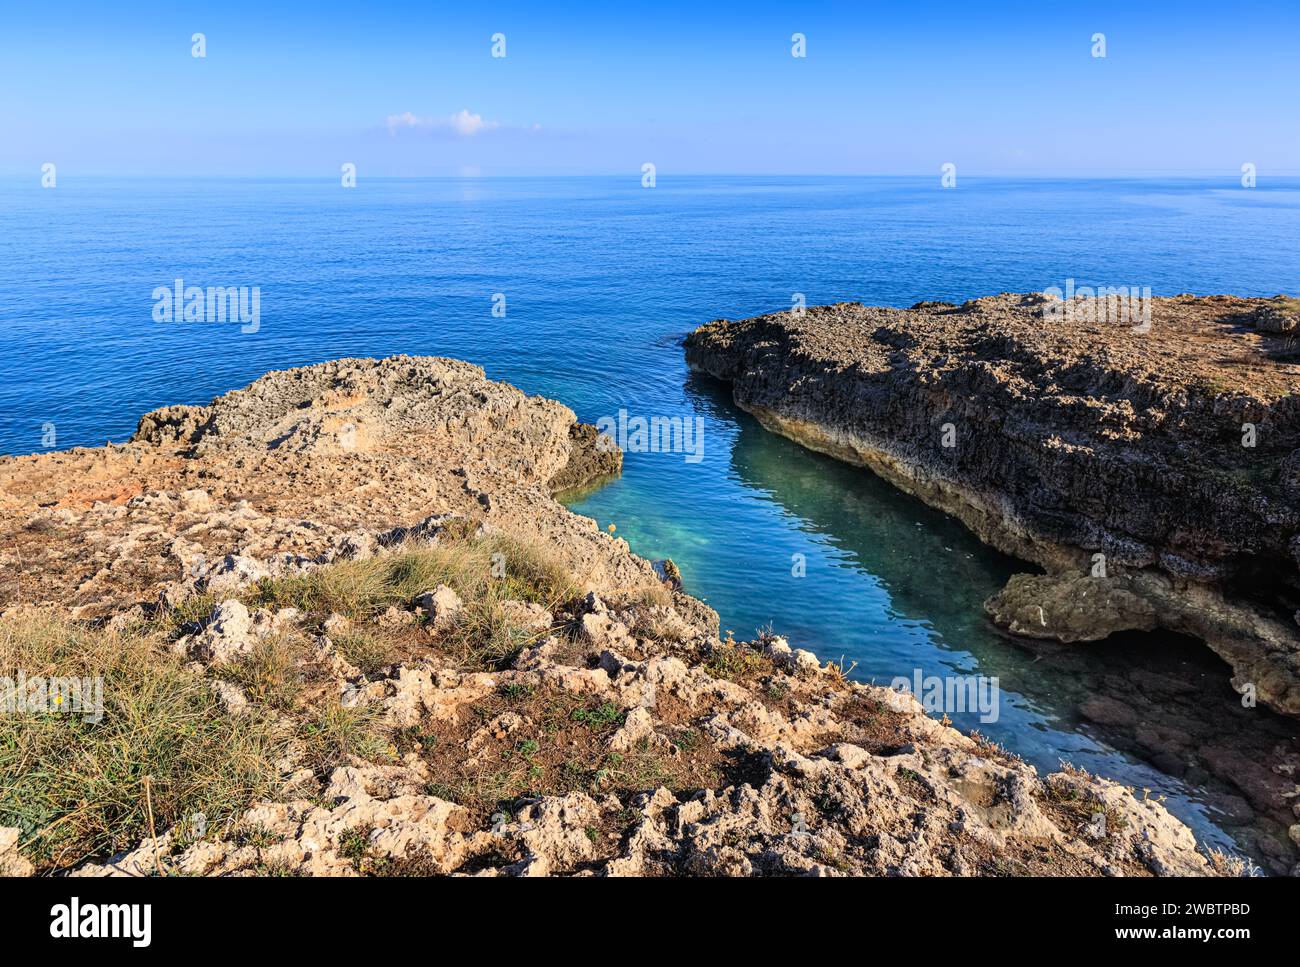 The most beautiful Apulian coast in Italy: Cala Corvino. Typical coastline near Monopoli : high and rocky coast characterized by small sandy coves wit Stock Photo